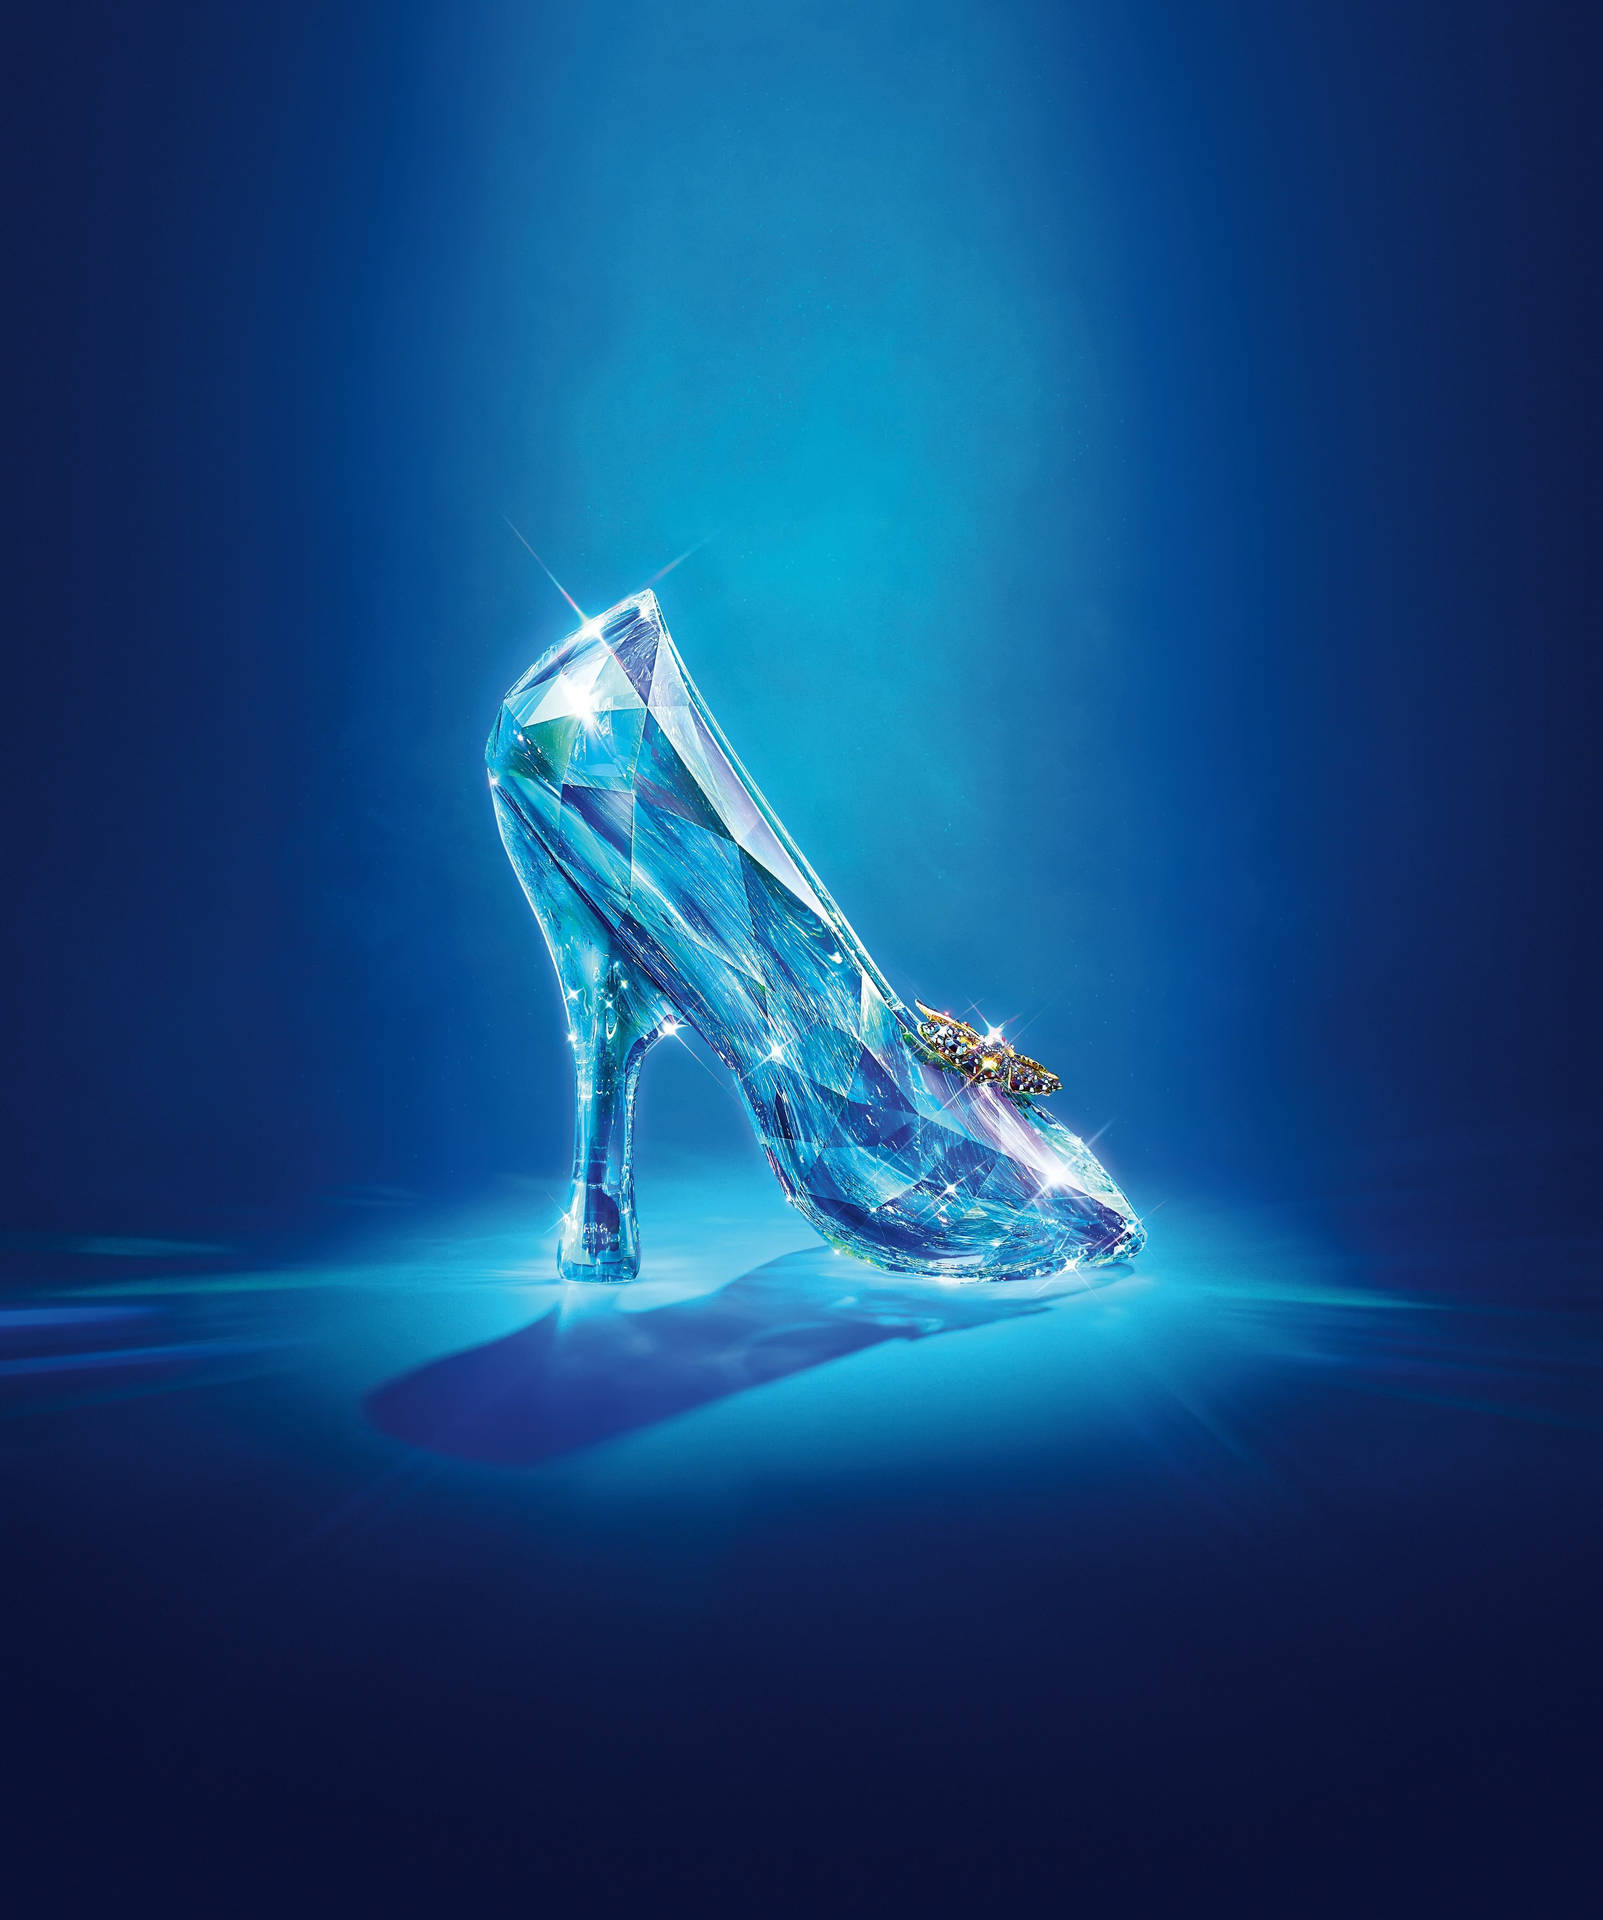 Cinderella 4050X4851 Wallpaper and Background Image